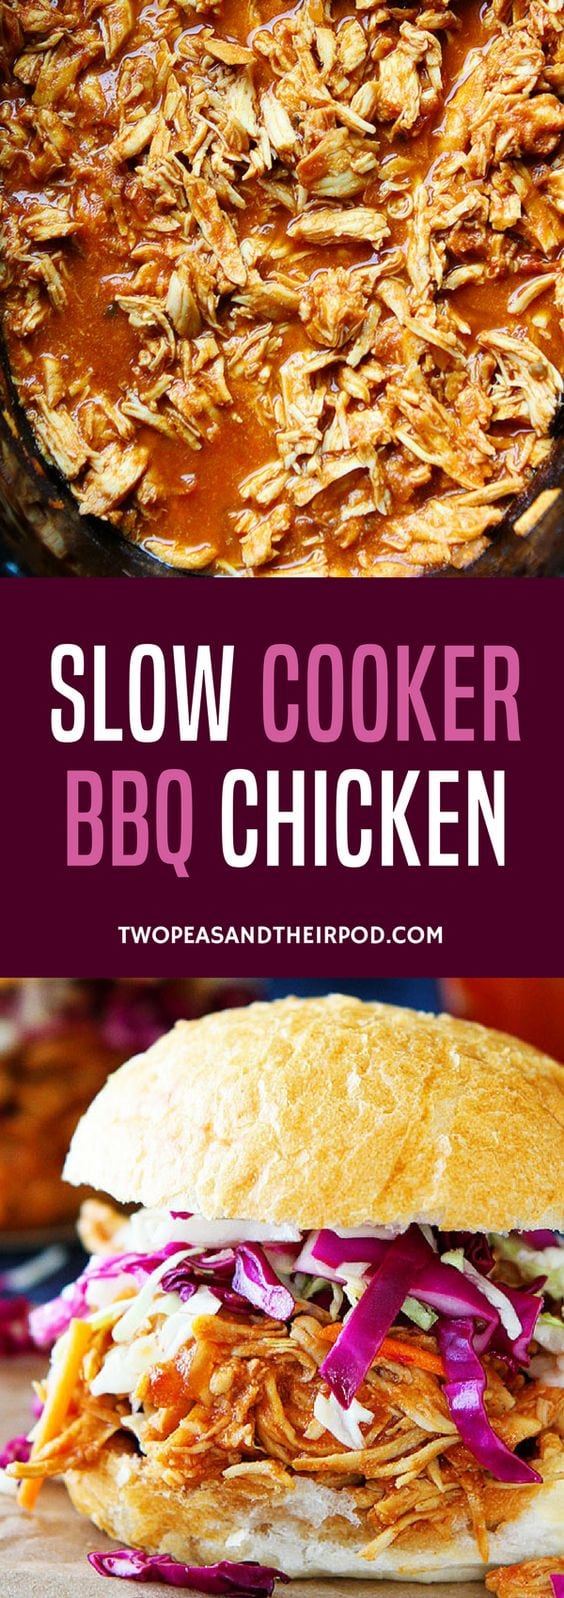 You only need 3 ingredients to make this easy Slow Cooker BBQ Chicken! This easy crockpot chicken dinner is a family favorite! #chicken #chickenrecipe #crockpot #slowcooker #easyrecipes